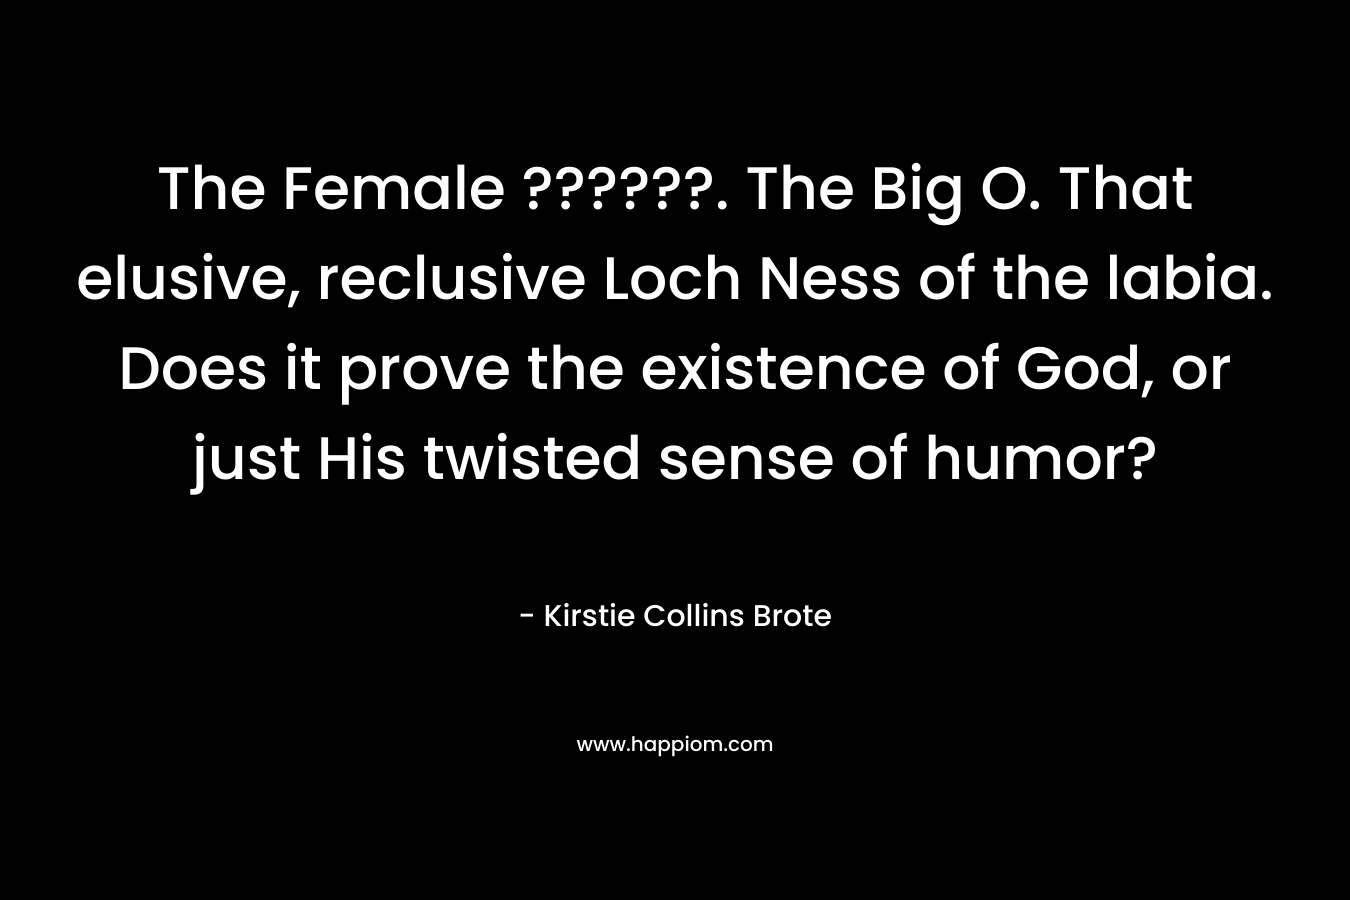 The Female ??????. The Big O. That elusive, reclusive Loch Ness of the labia. Does it prove the existence of God, or just His twisted sense of humor?